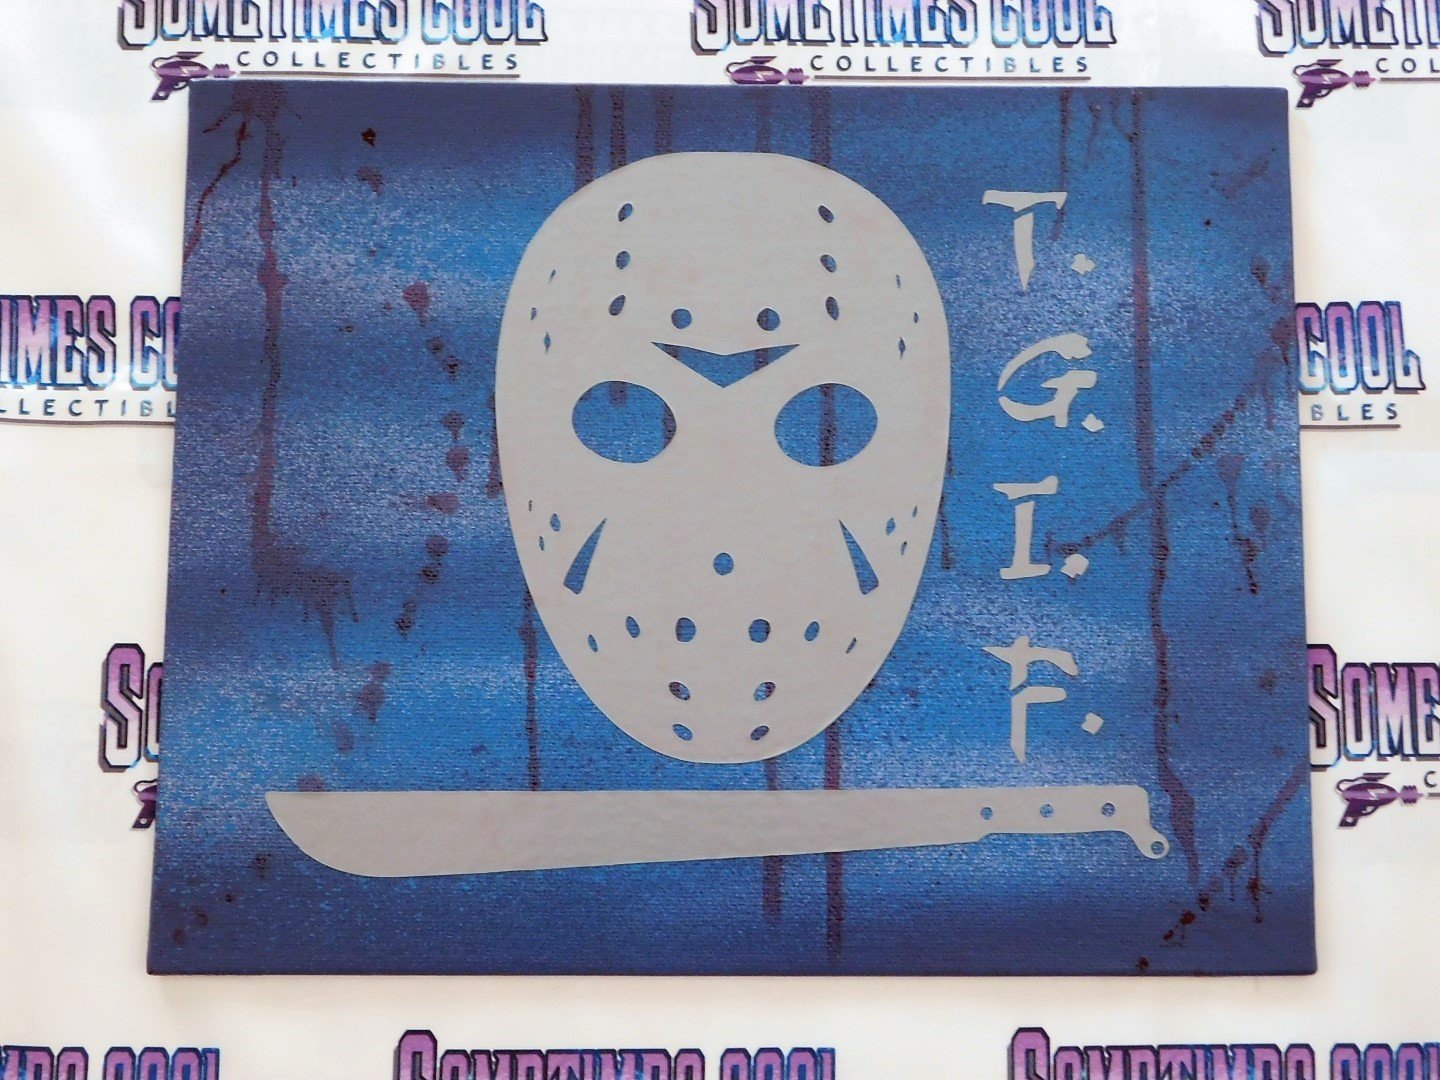 "T.G.I.F." - Voorhees Style Painting